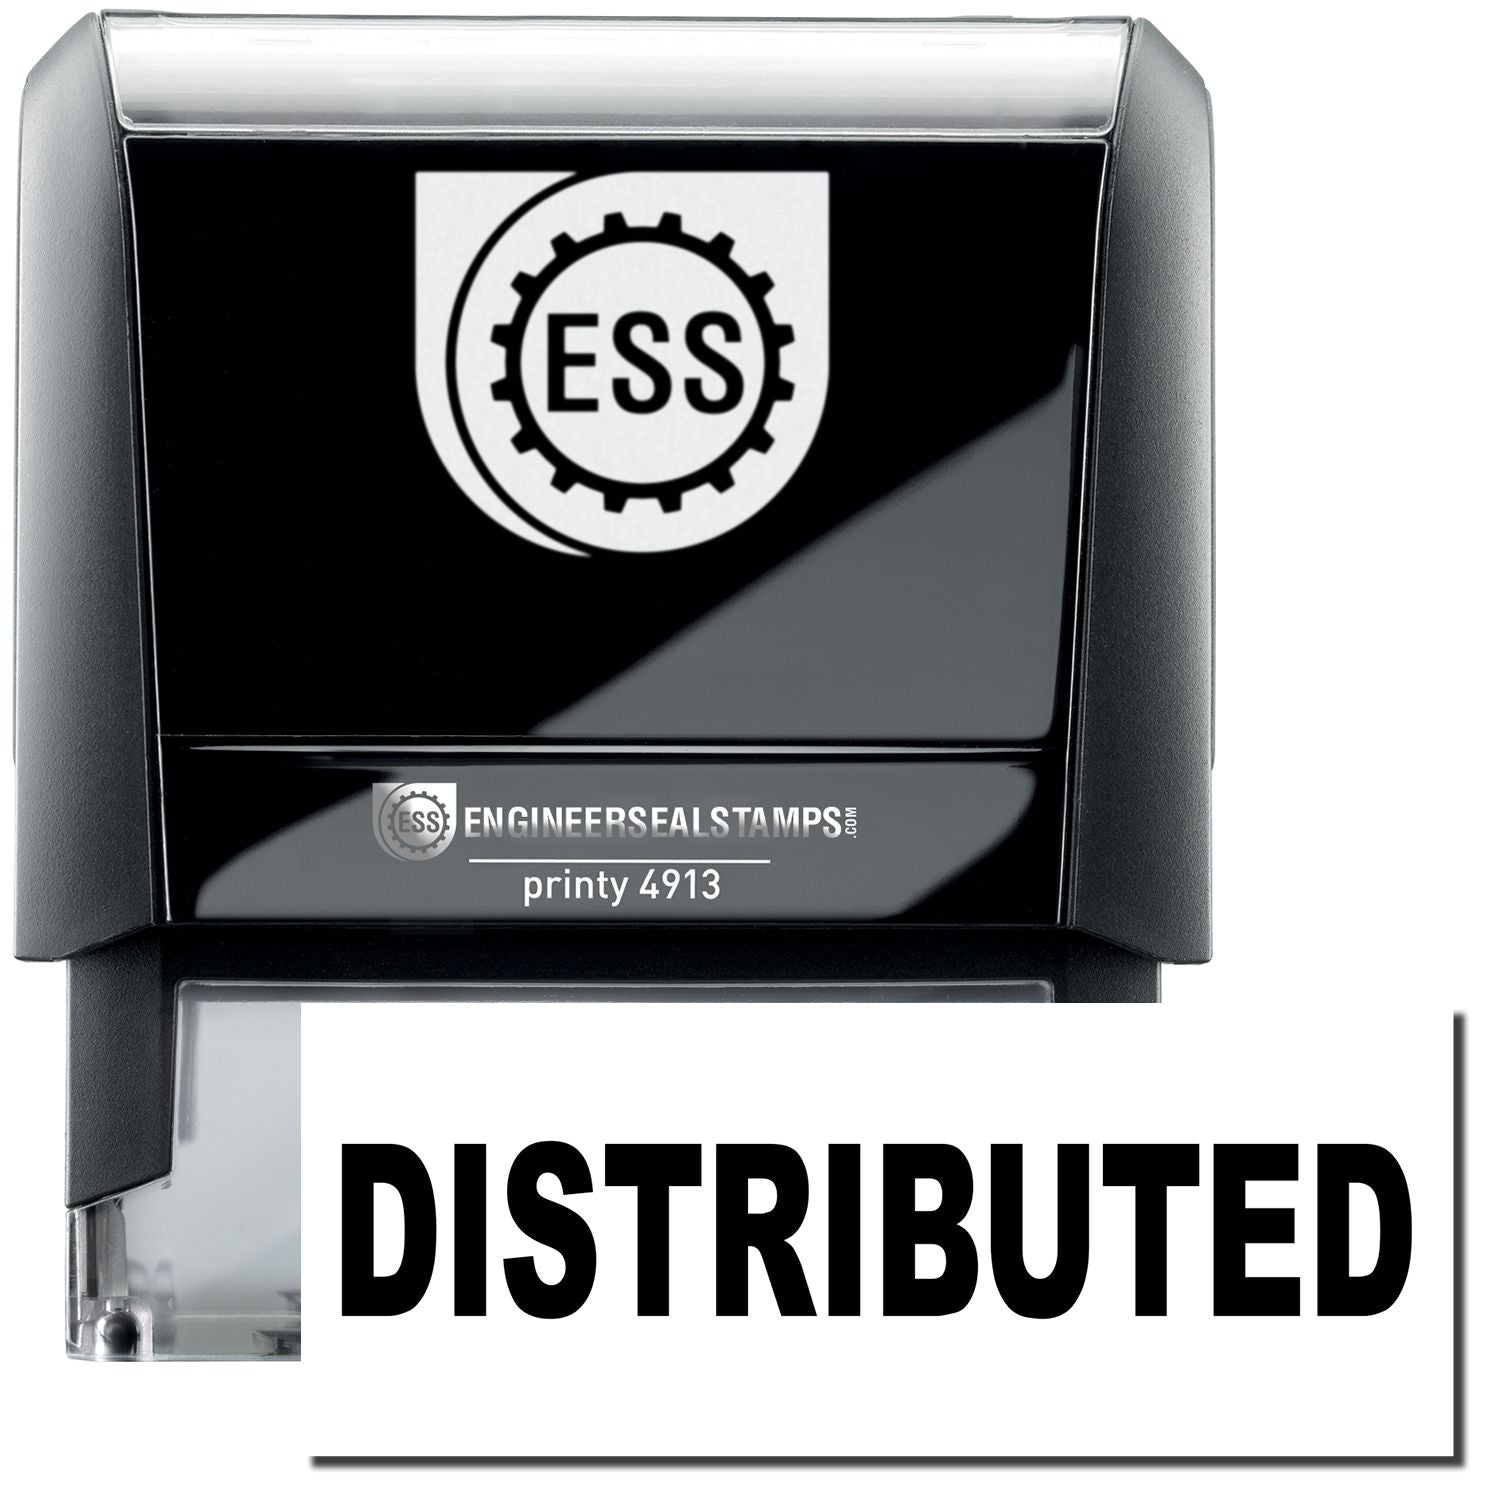 A self-inking stamp with a stamped image showing how the text "DISTRIBUTED" in a large bold font is displayed by it.